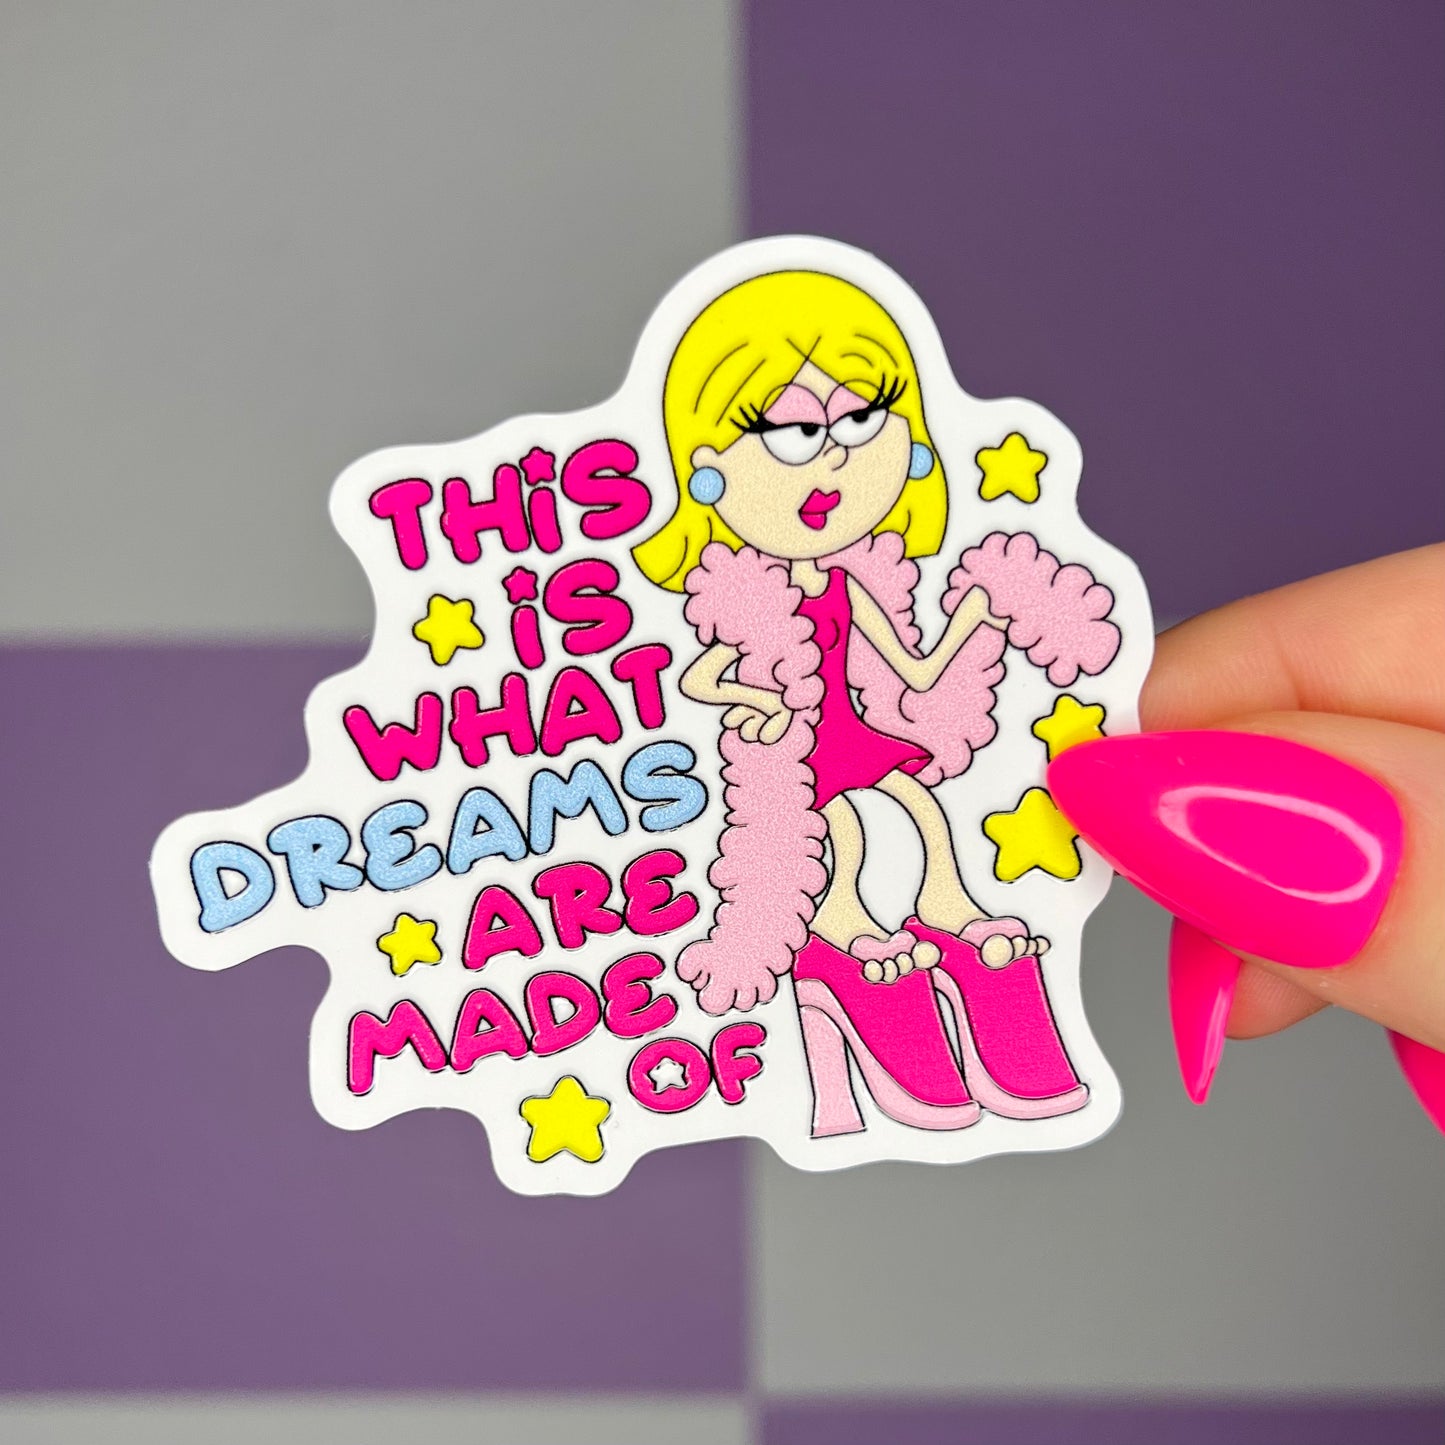 Lizzie This Is What Dreams Are Made Of Sticker